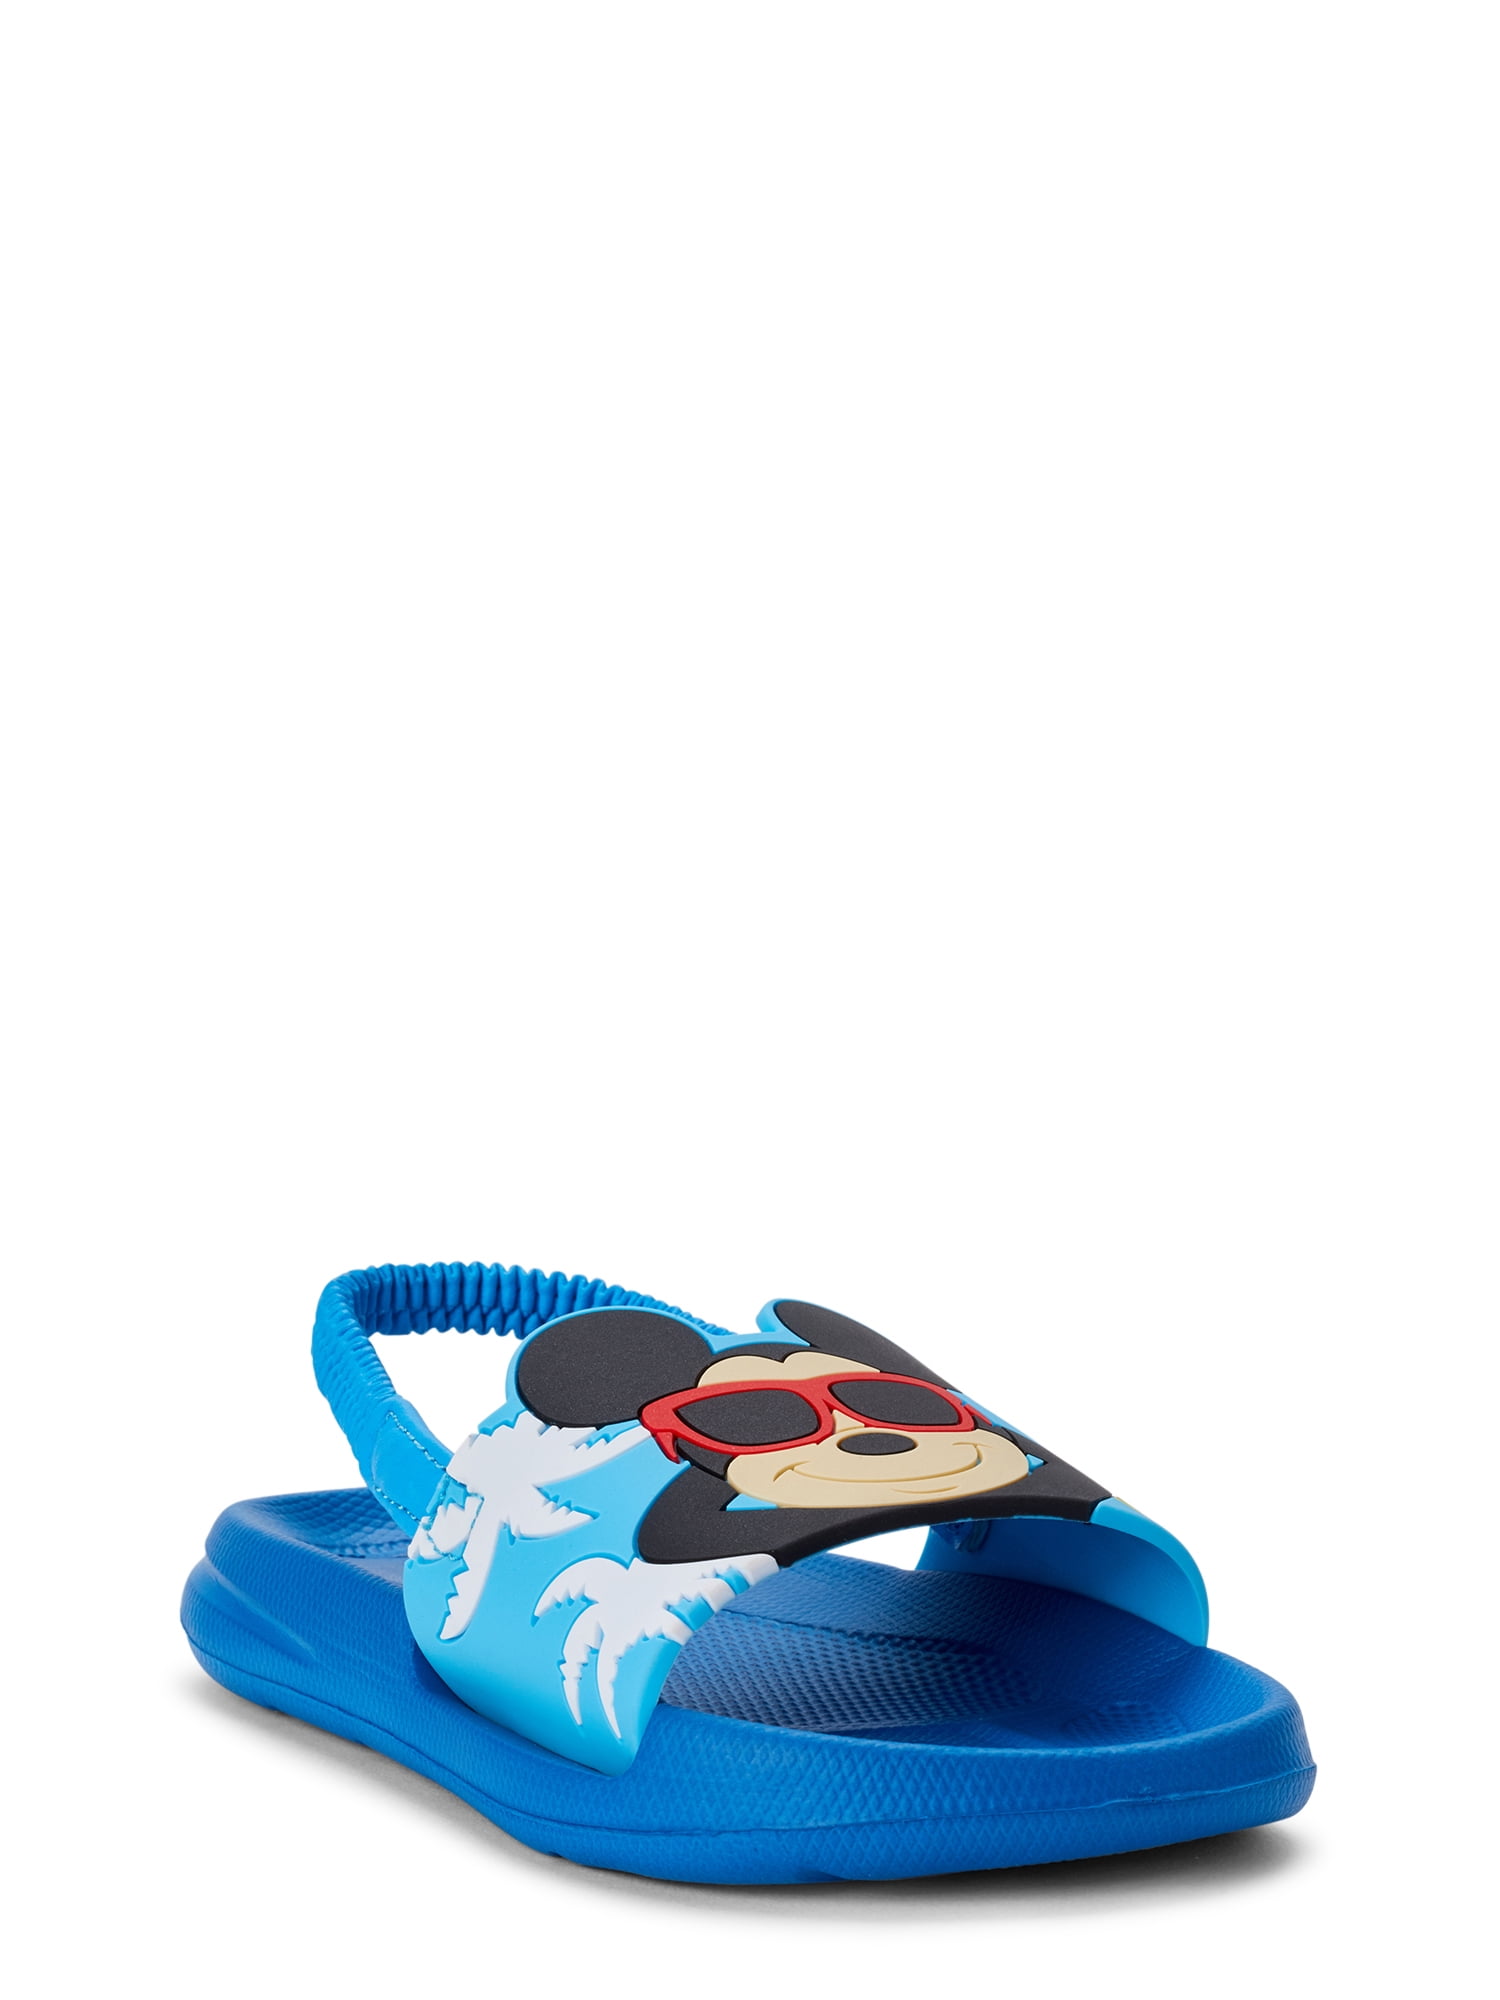  Mickey  Mouse  Disney Mickey  Mouse  Slide Sandal  Toddler 